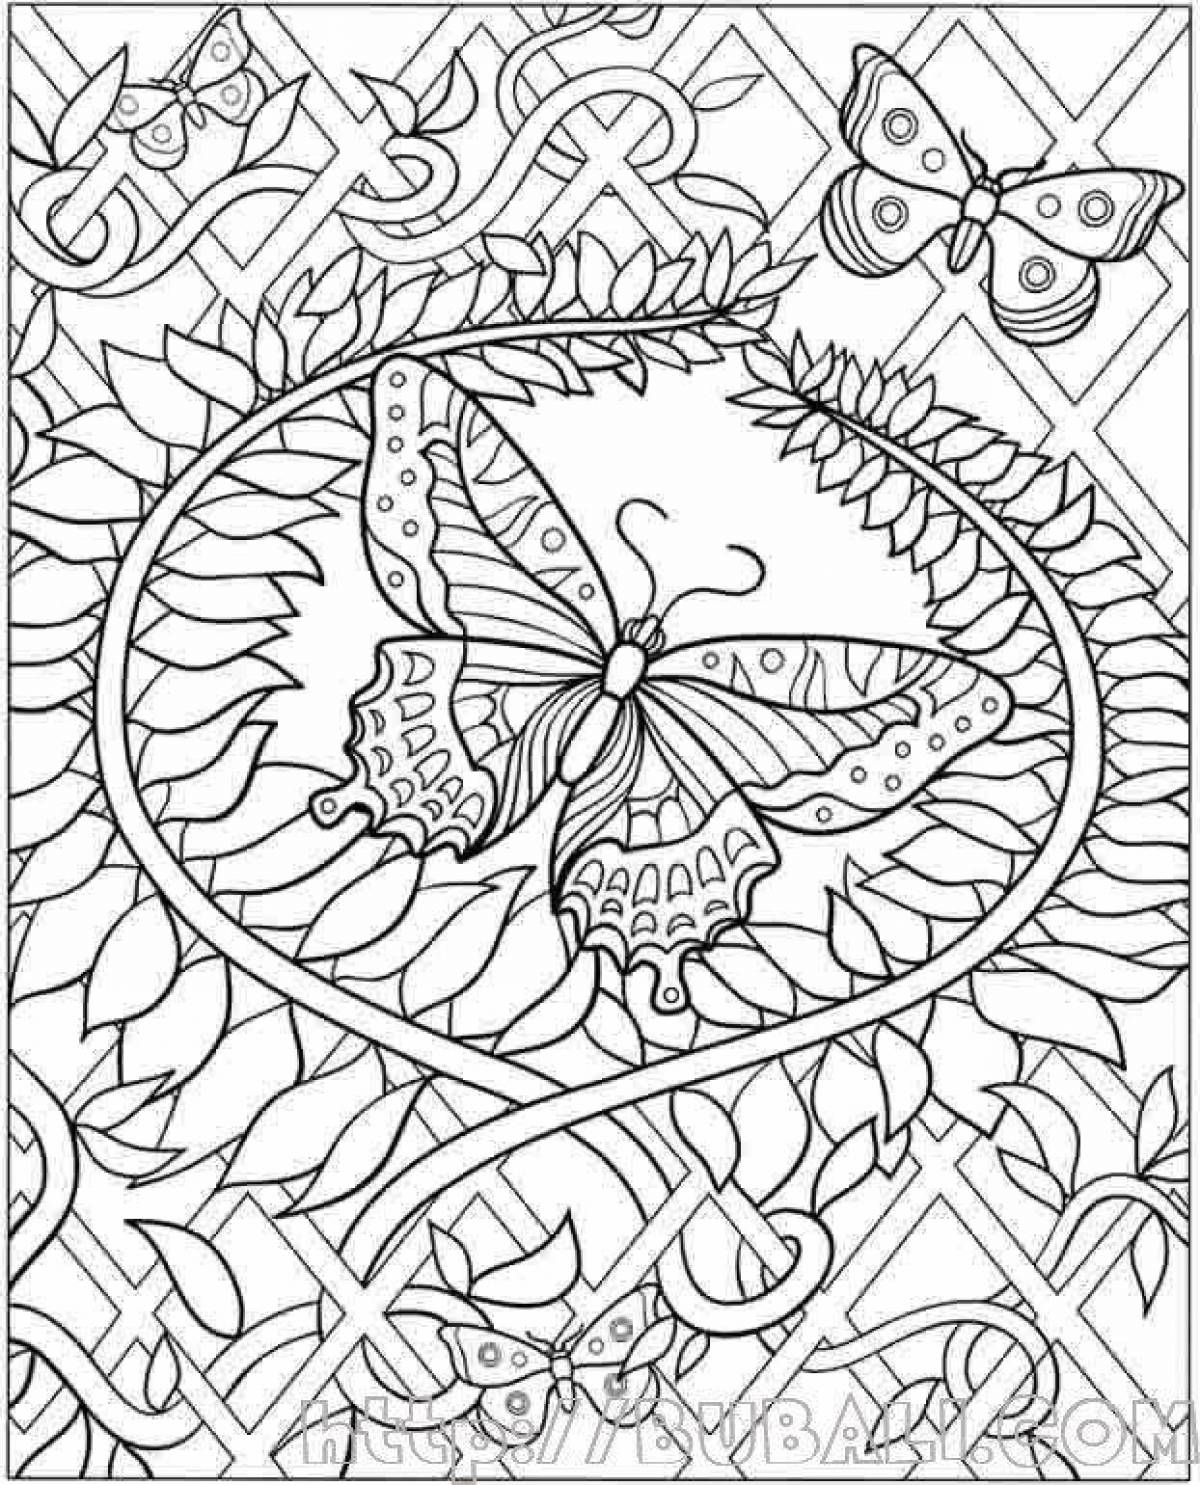 Refreshing anti-stress coloring book for adults